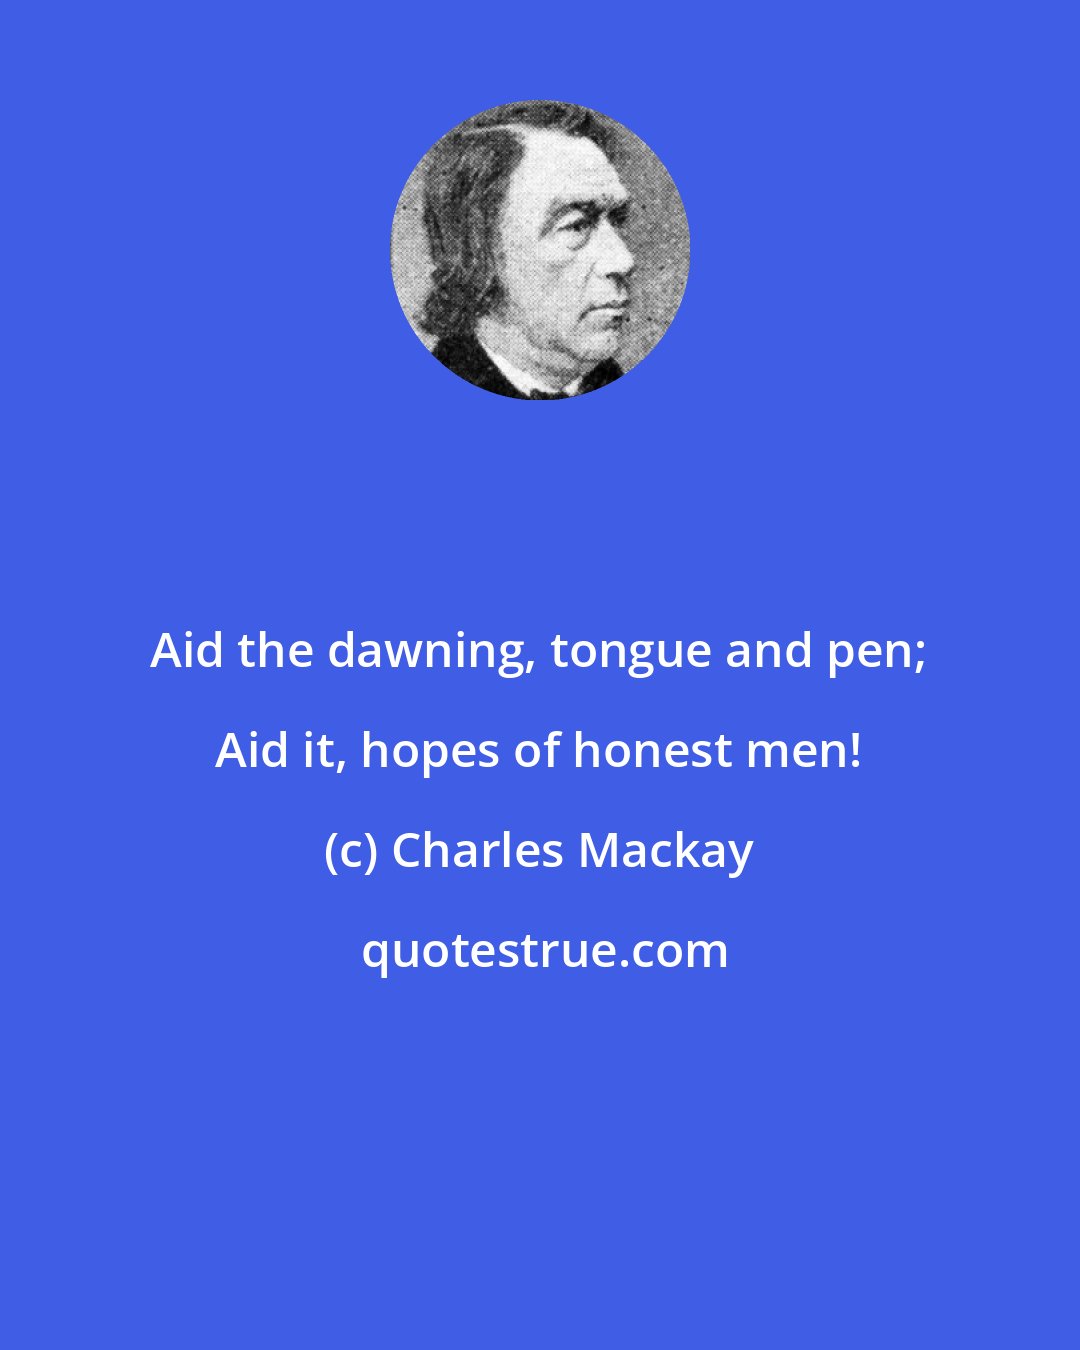 Charles Mackay: Aid the dawning, tongue and pen; Aid it, hopes of honest men!